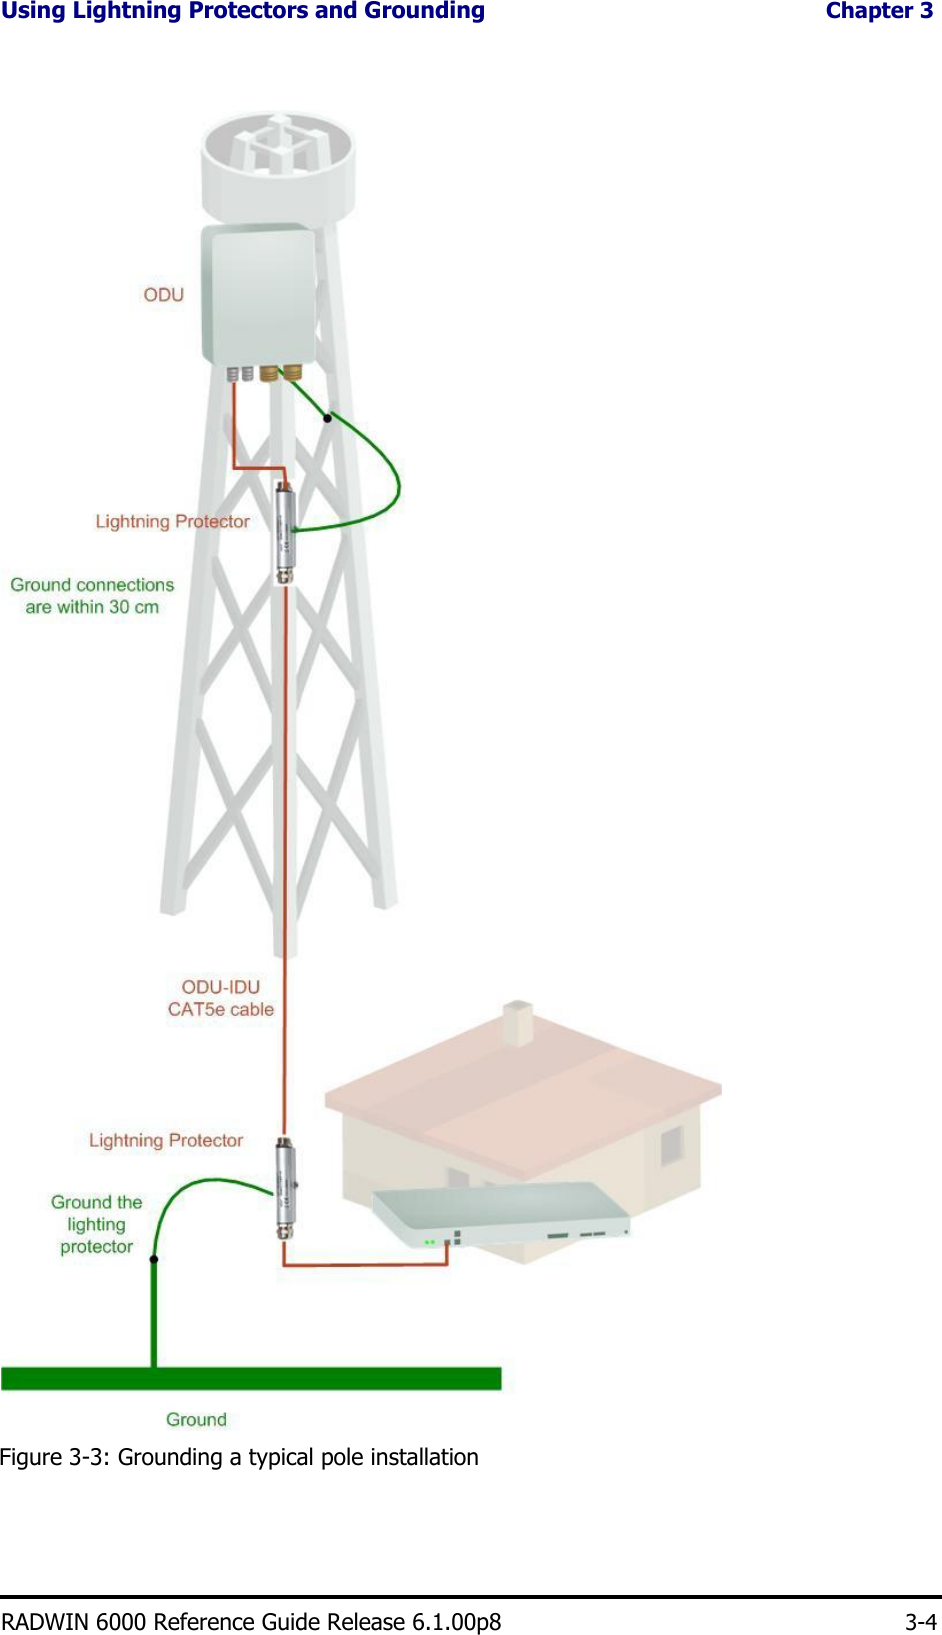 Using Lightning Protectors and Grounding Chapter 3                                                                    Figure 3-3: Grounding a typical pole installation       RADWIN 6000 Reference Guide Release 6.1.00p8 3-4